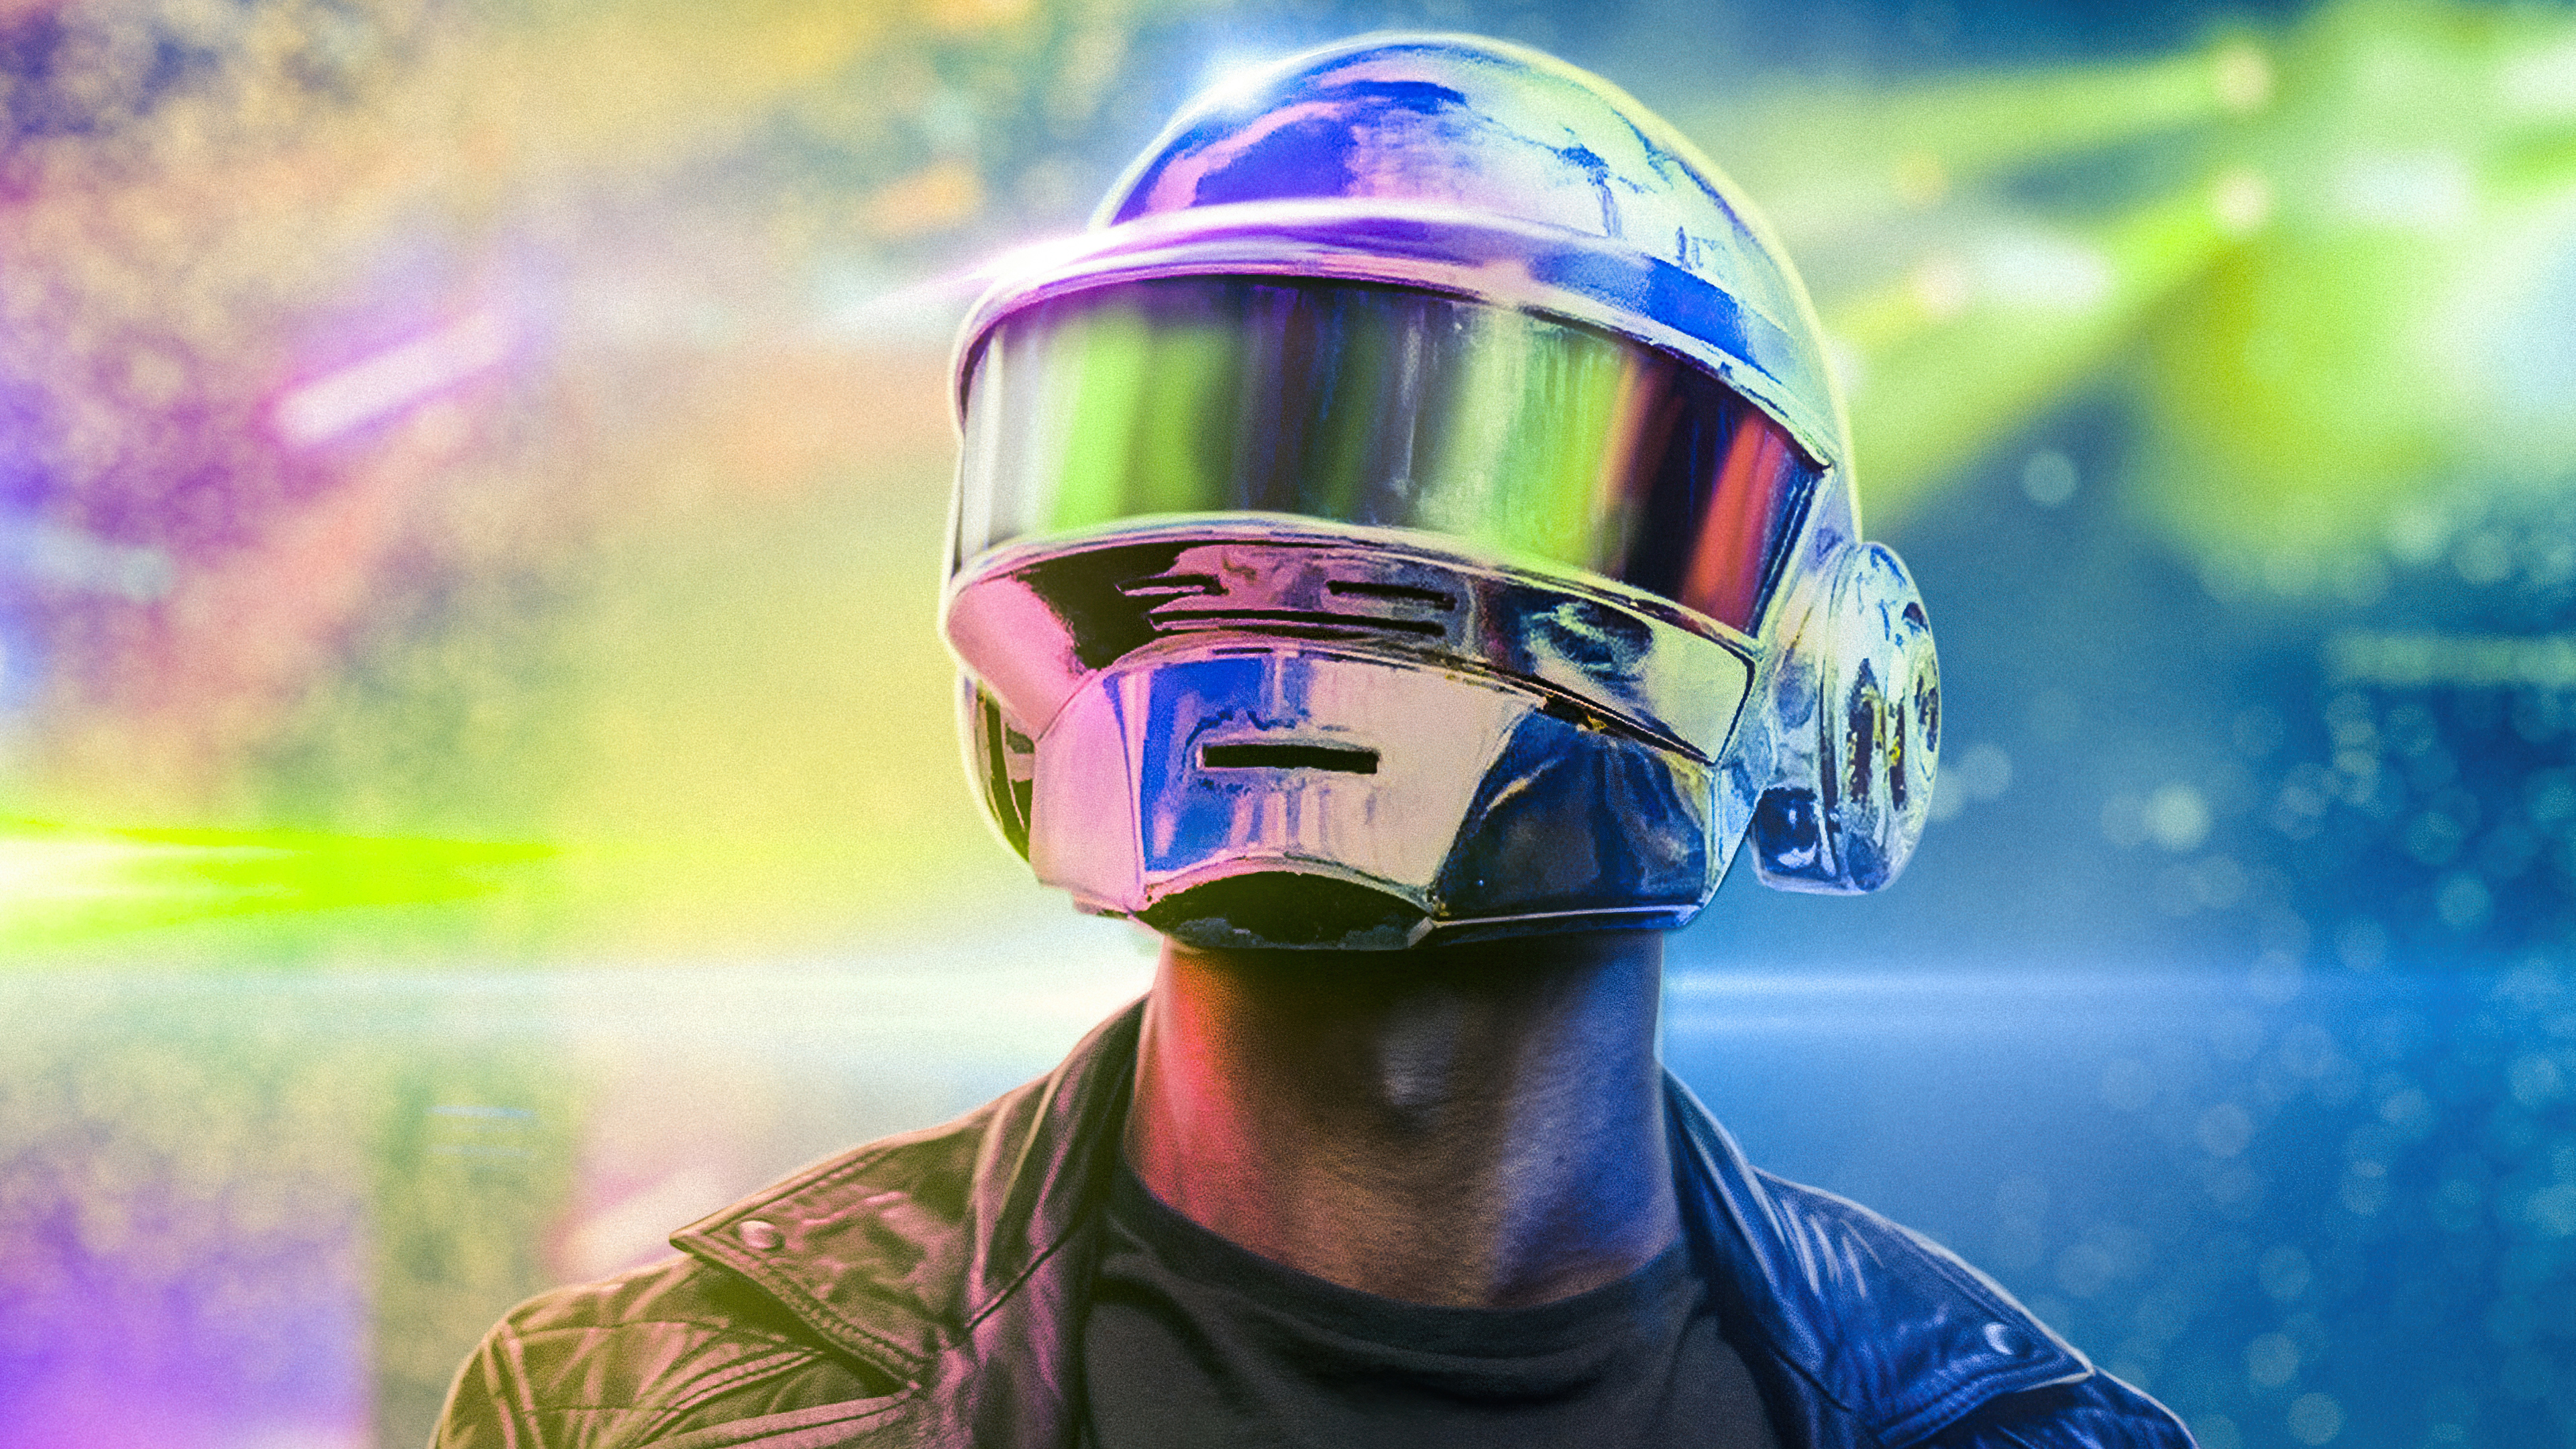 Daft Punk Helmet 4k, HD Music, 4k Wallpapers, Images, Backgrounds, Photos  and Pictures